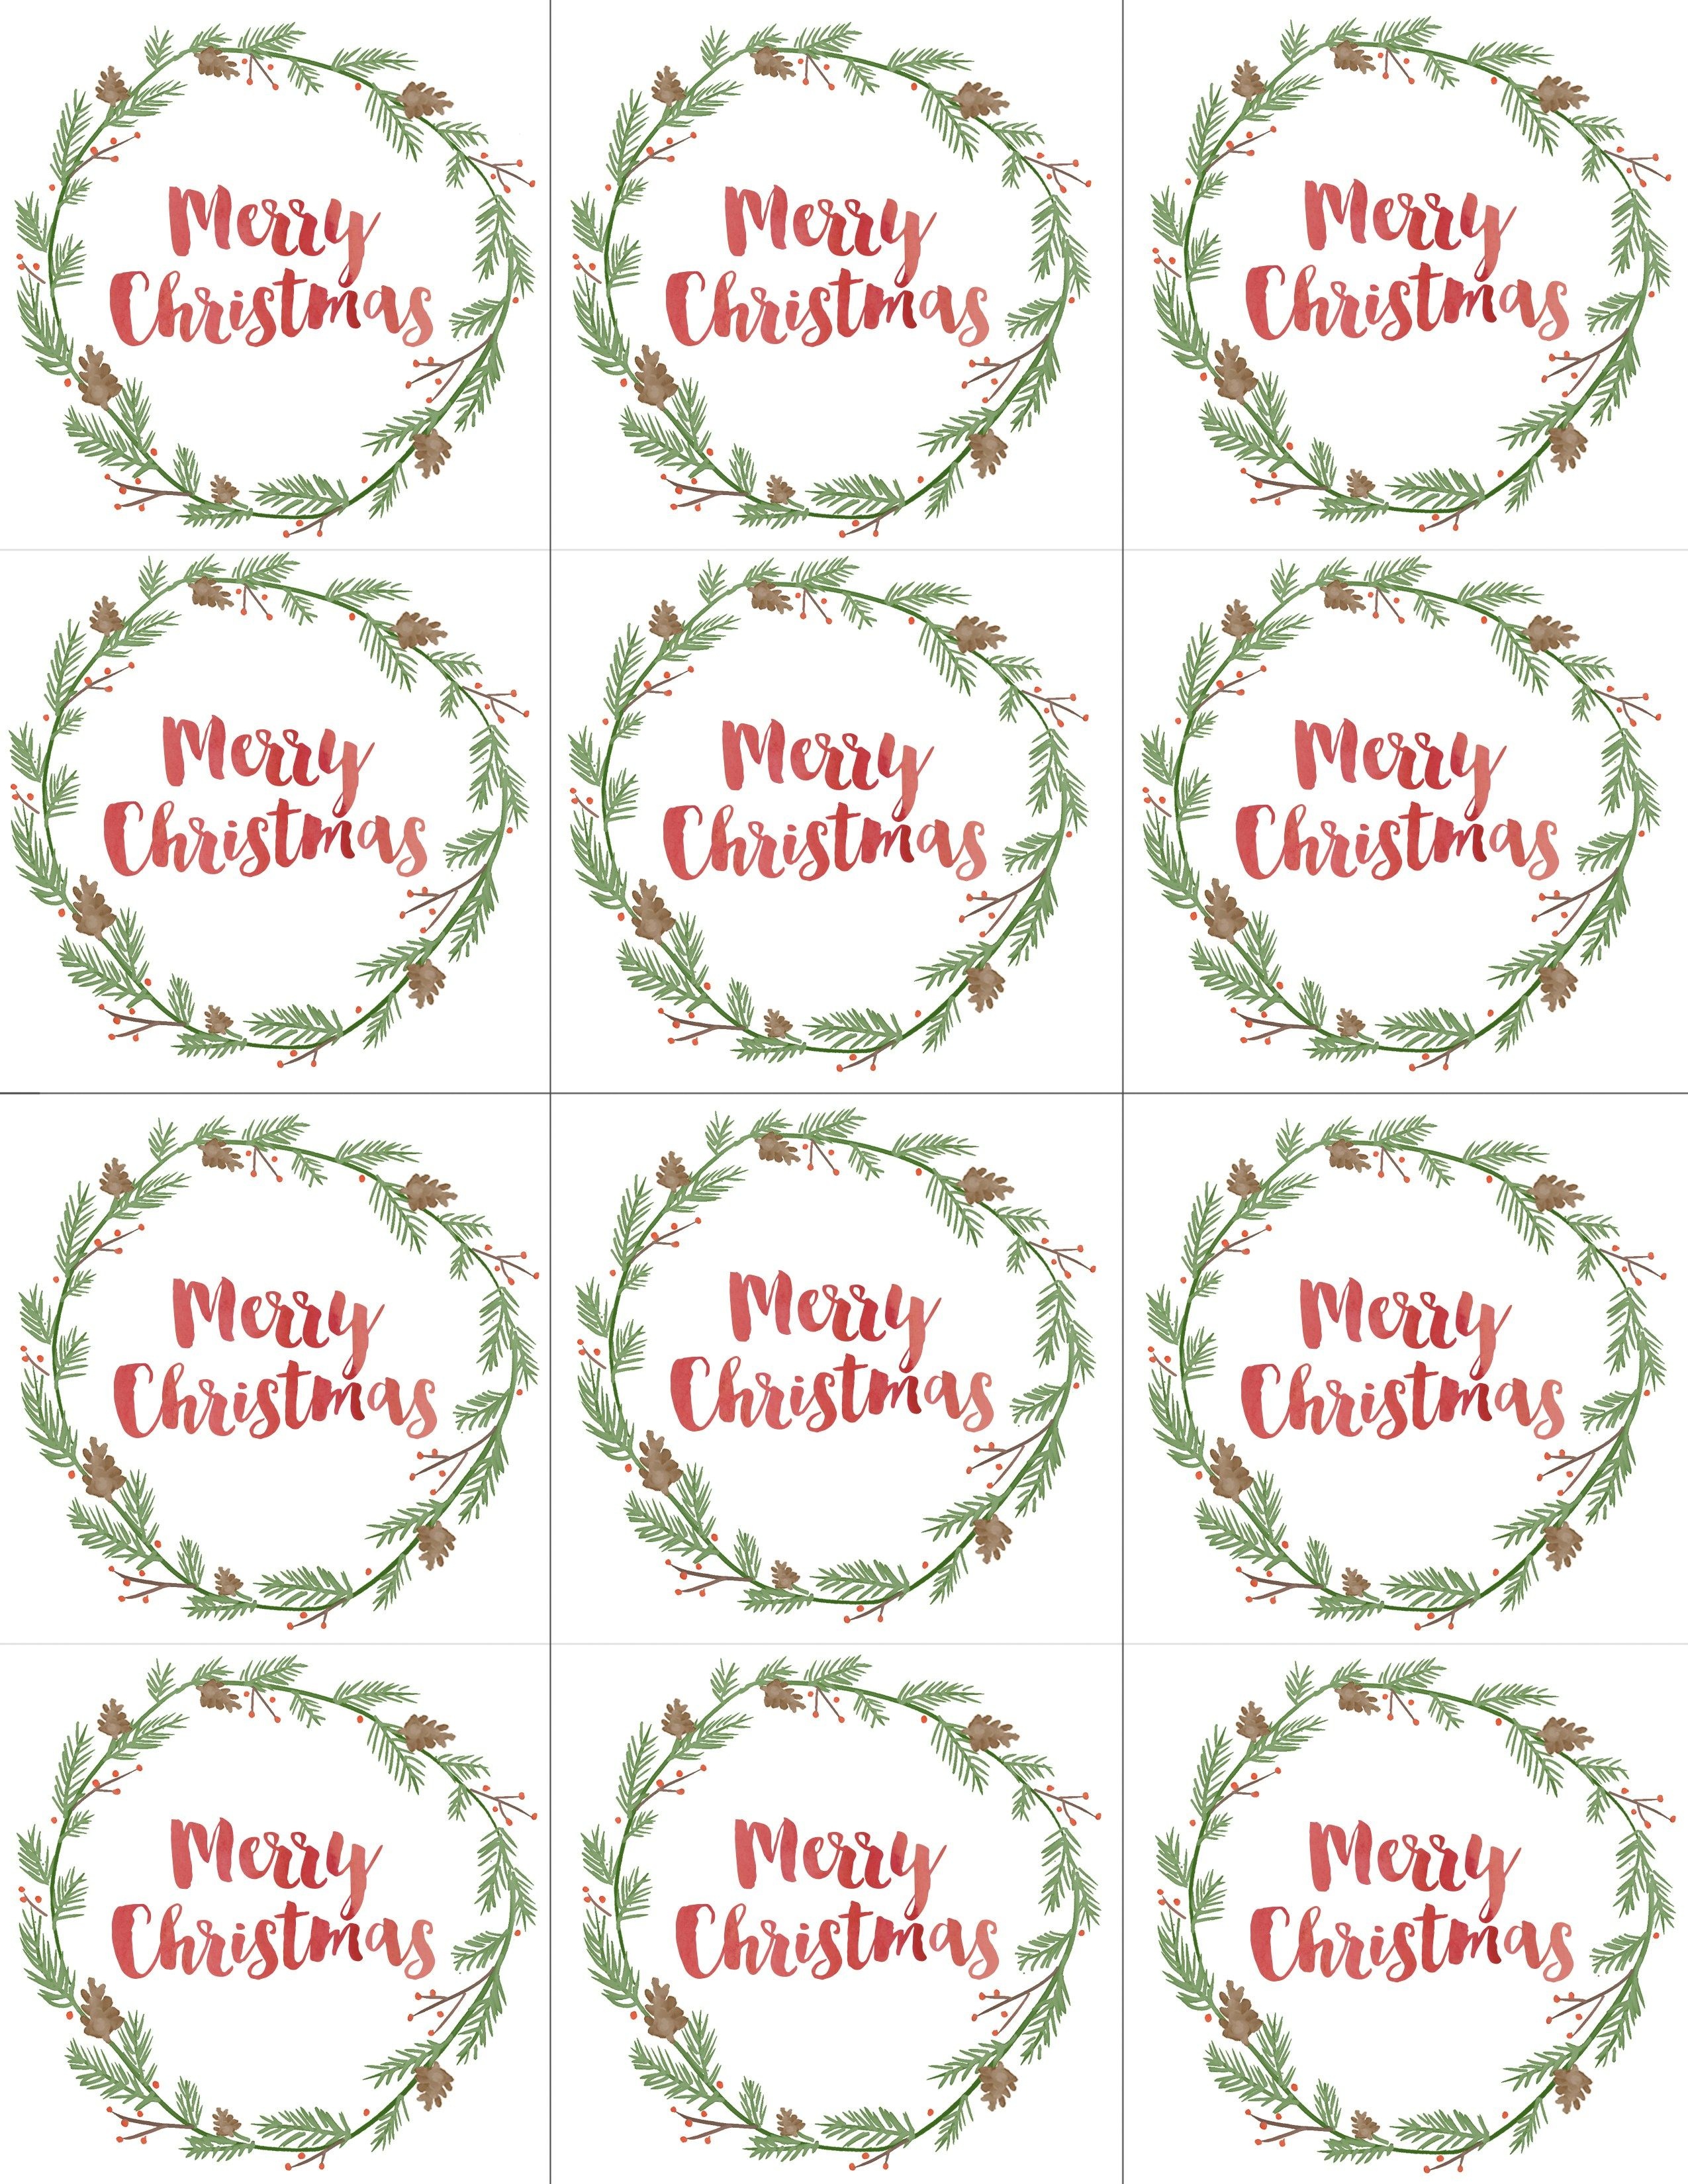 Hand Painted Gift Tags Free Printable | Christmas | Christmas Gift - Christmas Name Tags Free Printable